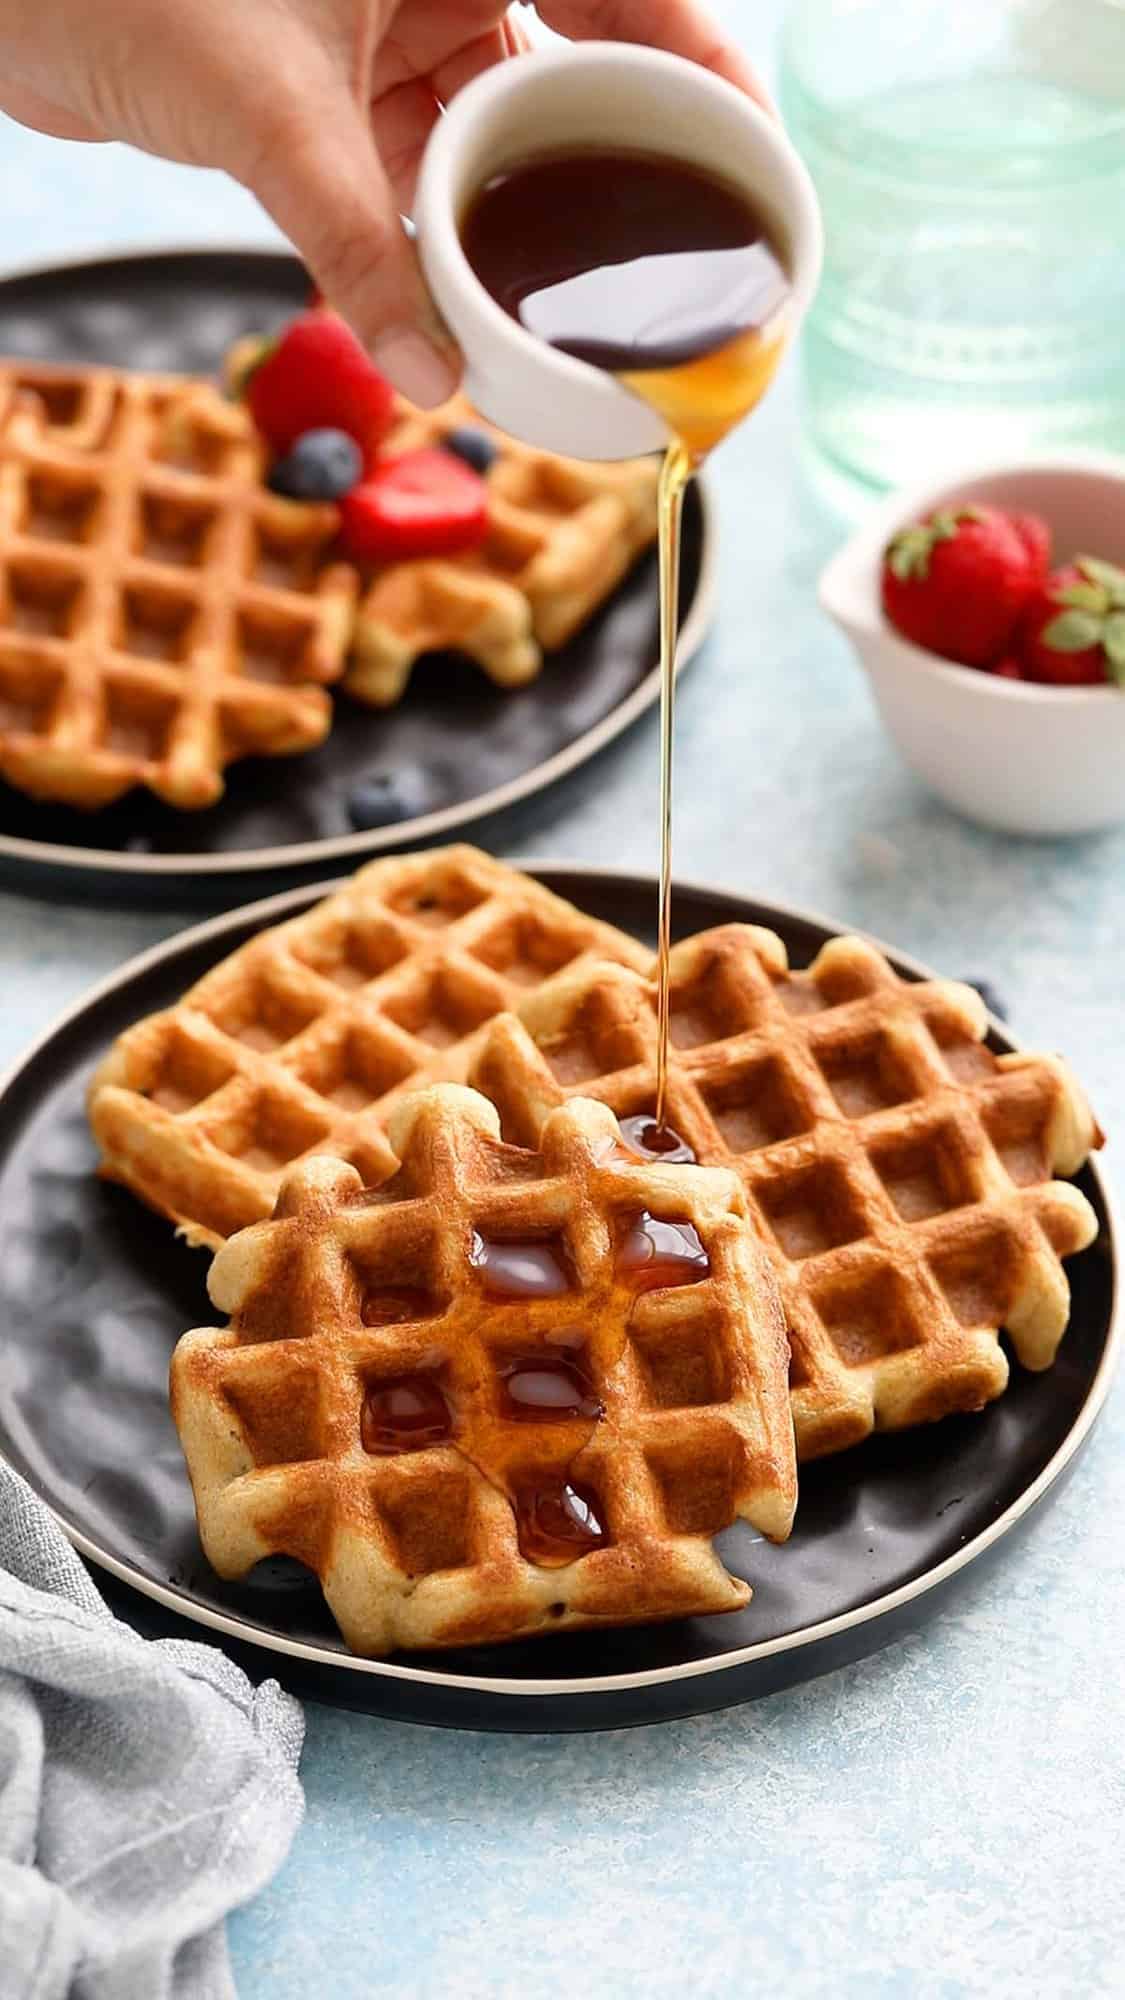 a hand pouring maple syrup on 3 three waffles placed on a black plate.